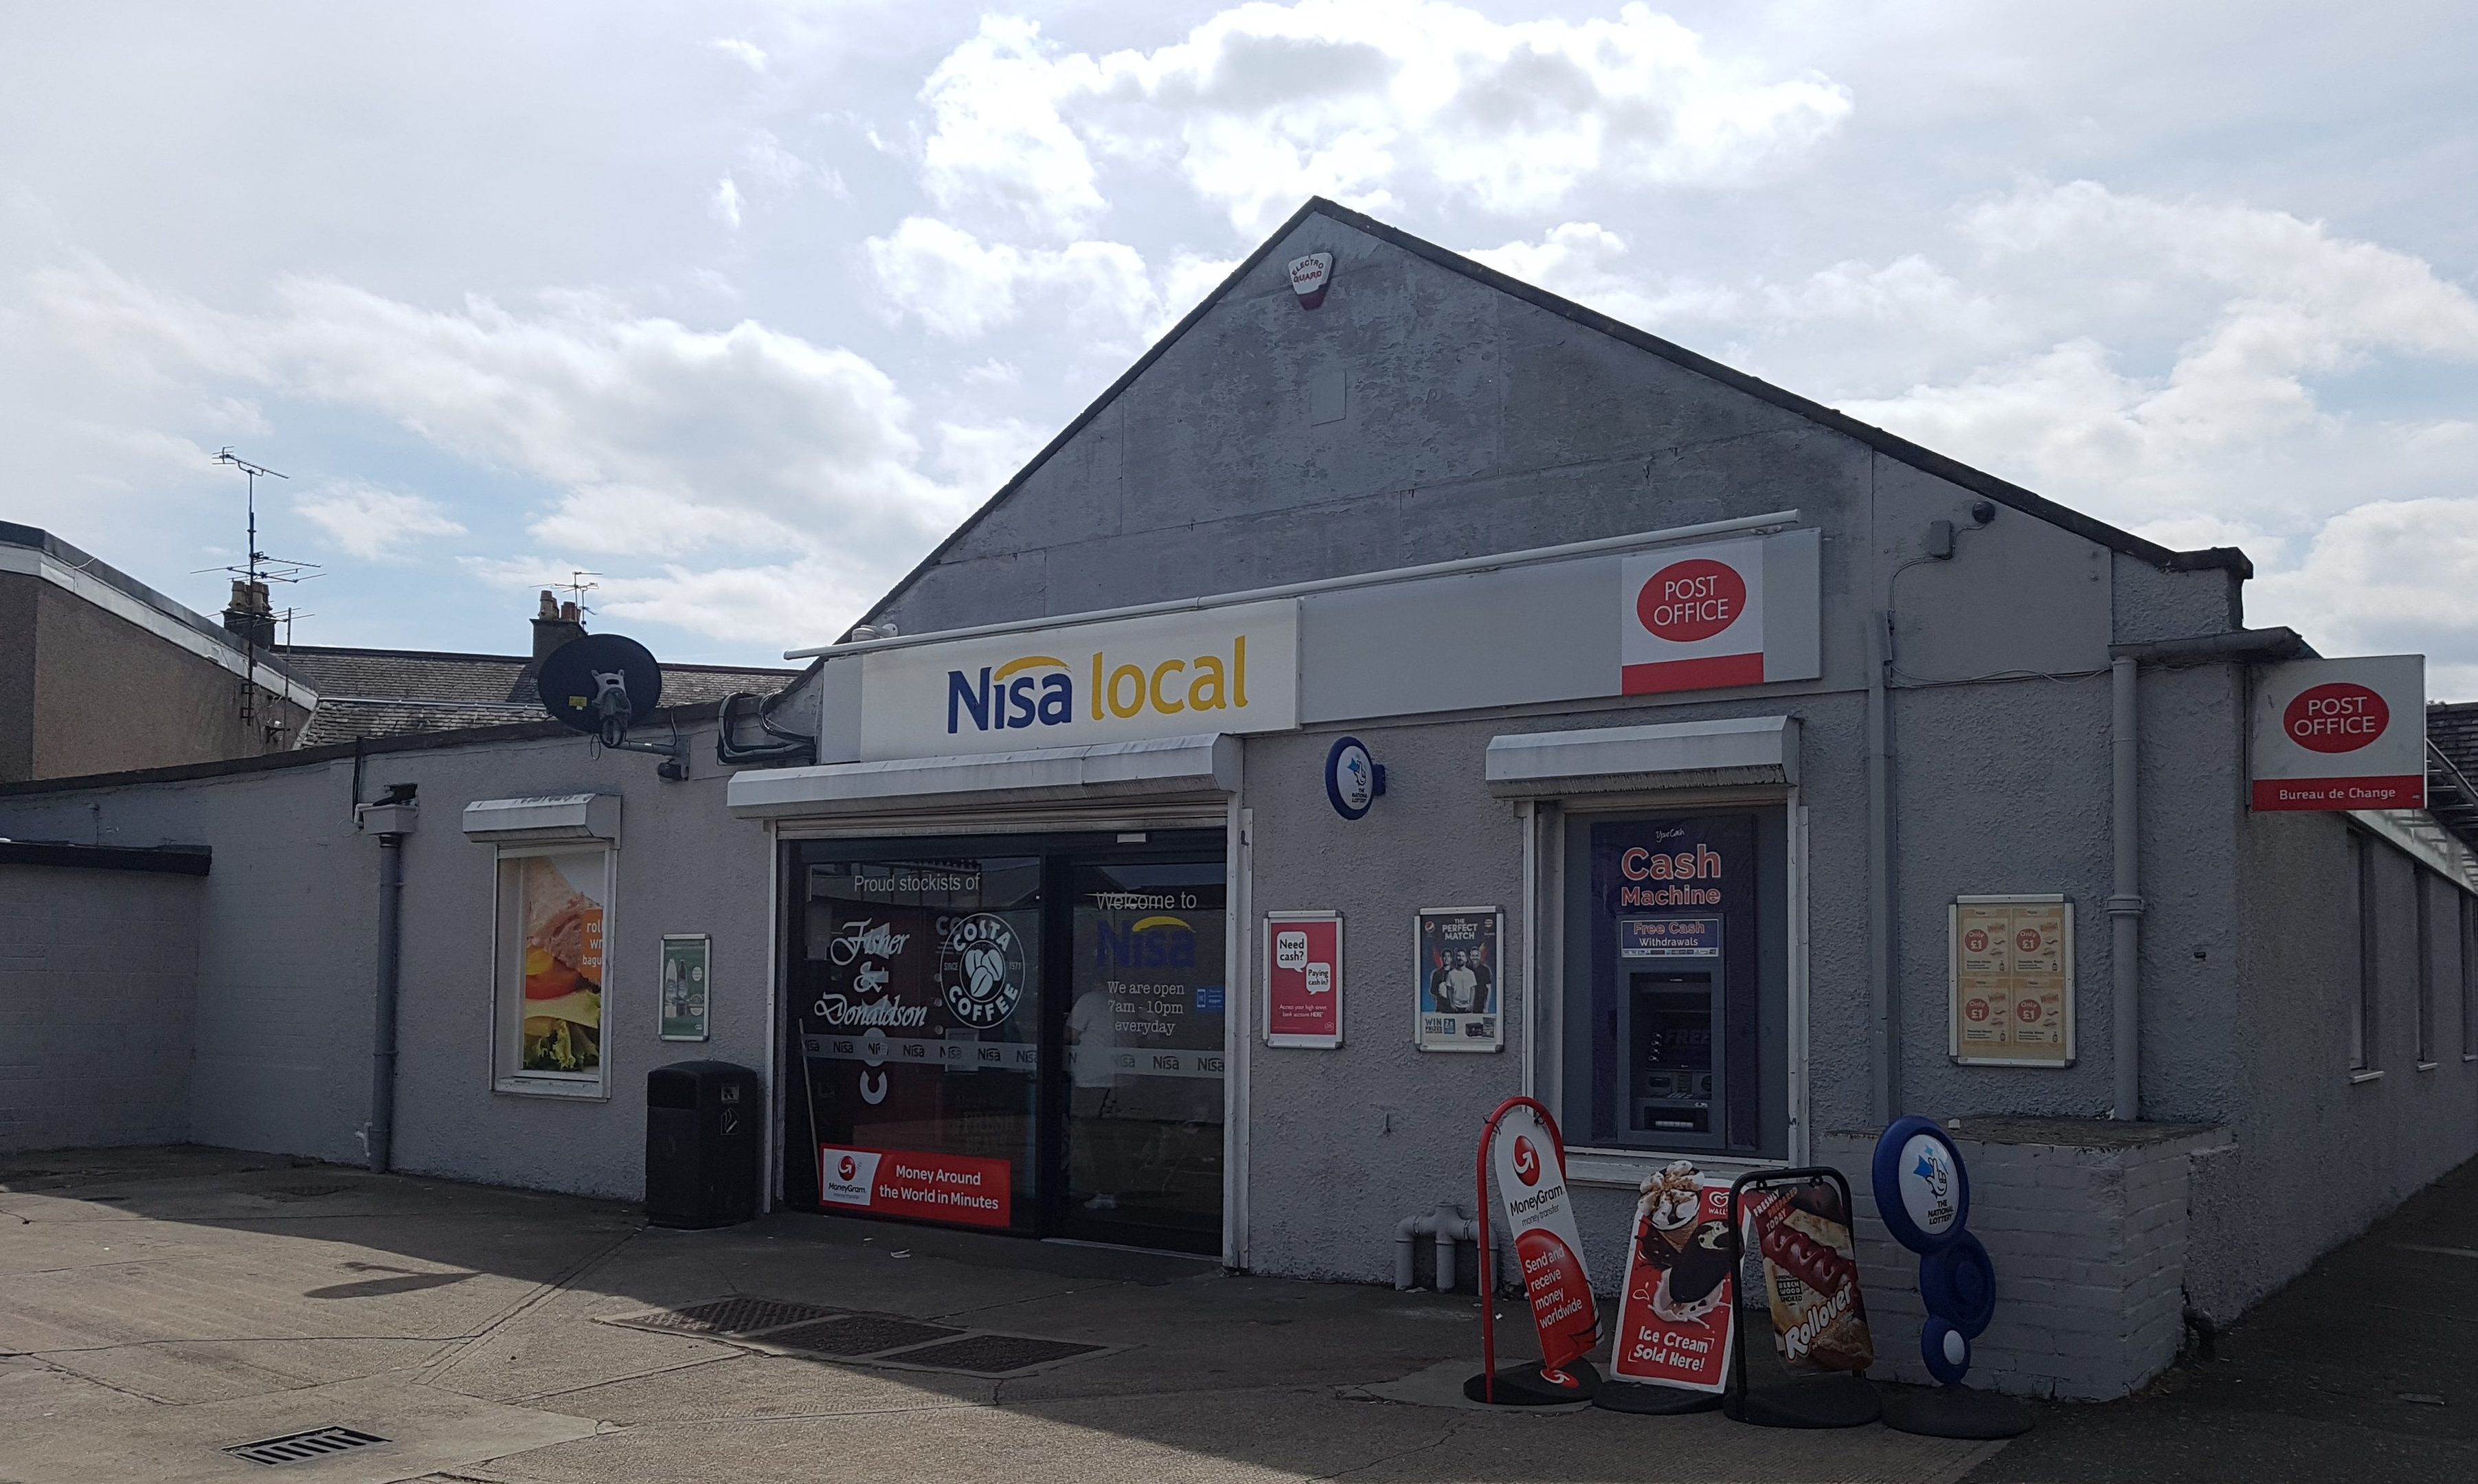 Armed thieves targeted the Leven branch on Saturday morning